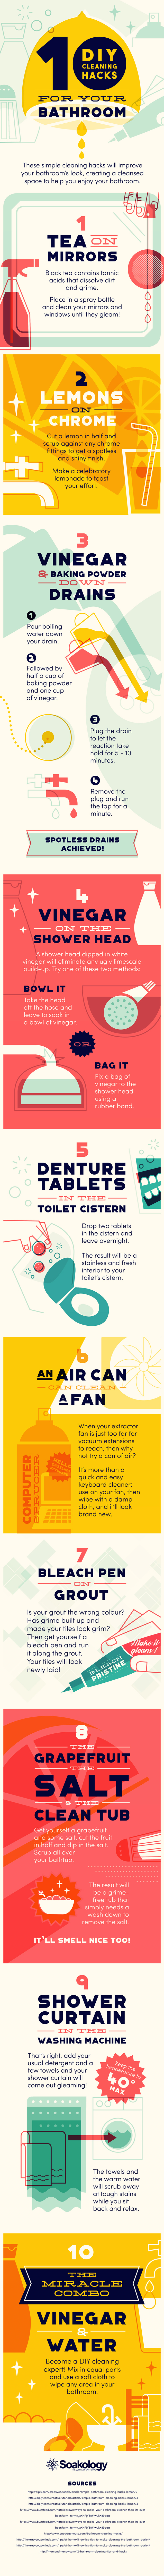 10 Easy Tricks for a Sparkling Clean Bathroom - Infographic